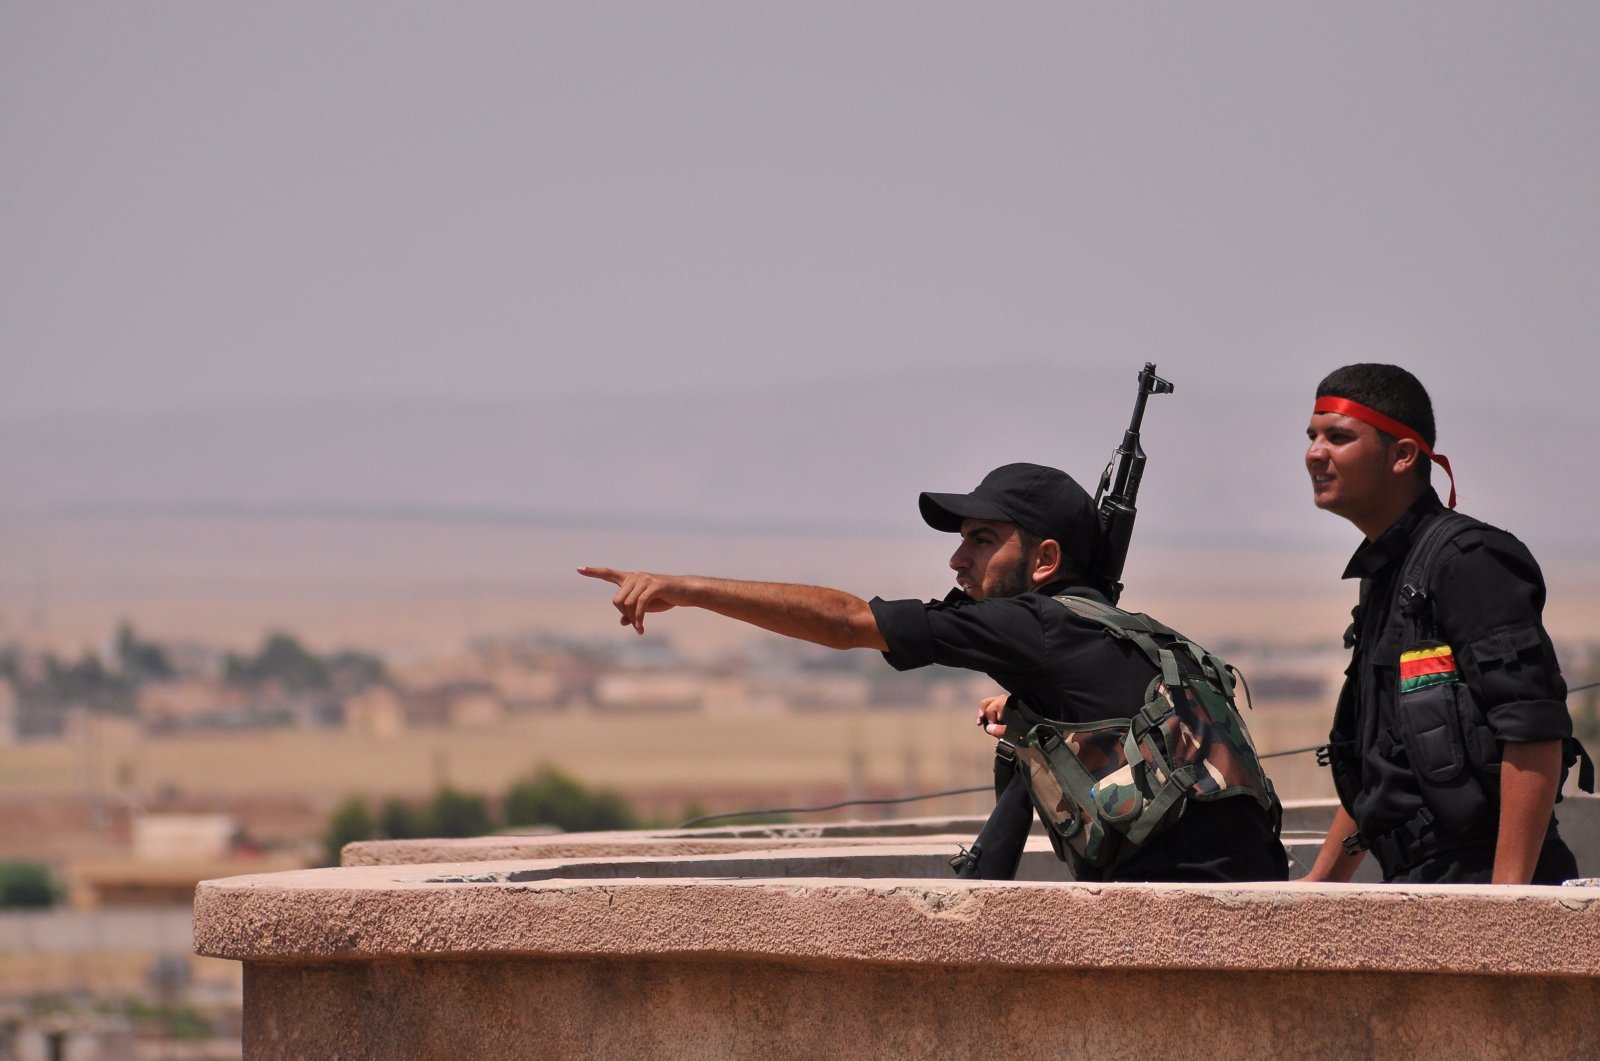 YPG terrorists monitor the horizon in the northeastern city of Hasakah, Syria, on June 28, 2015. (AFP Photo)